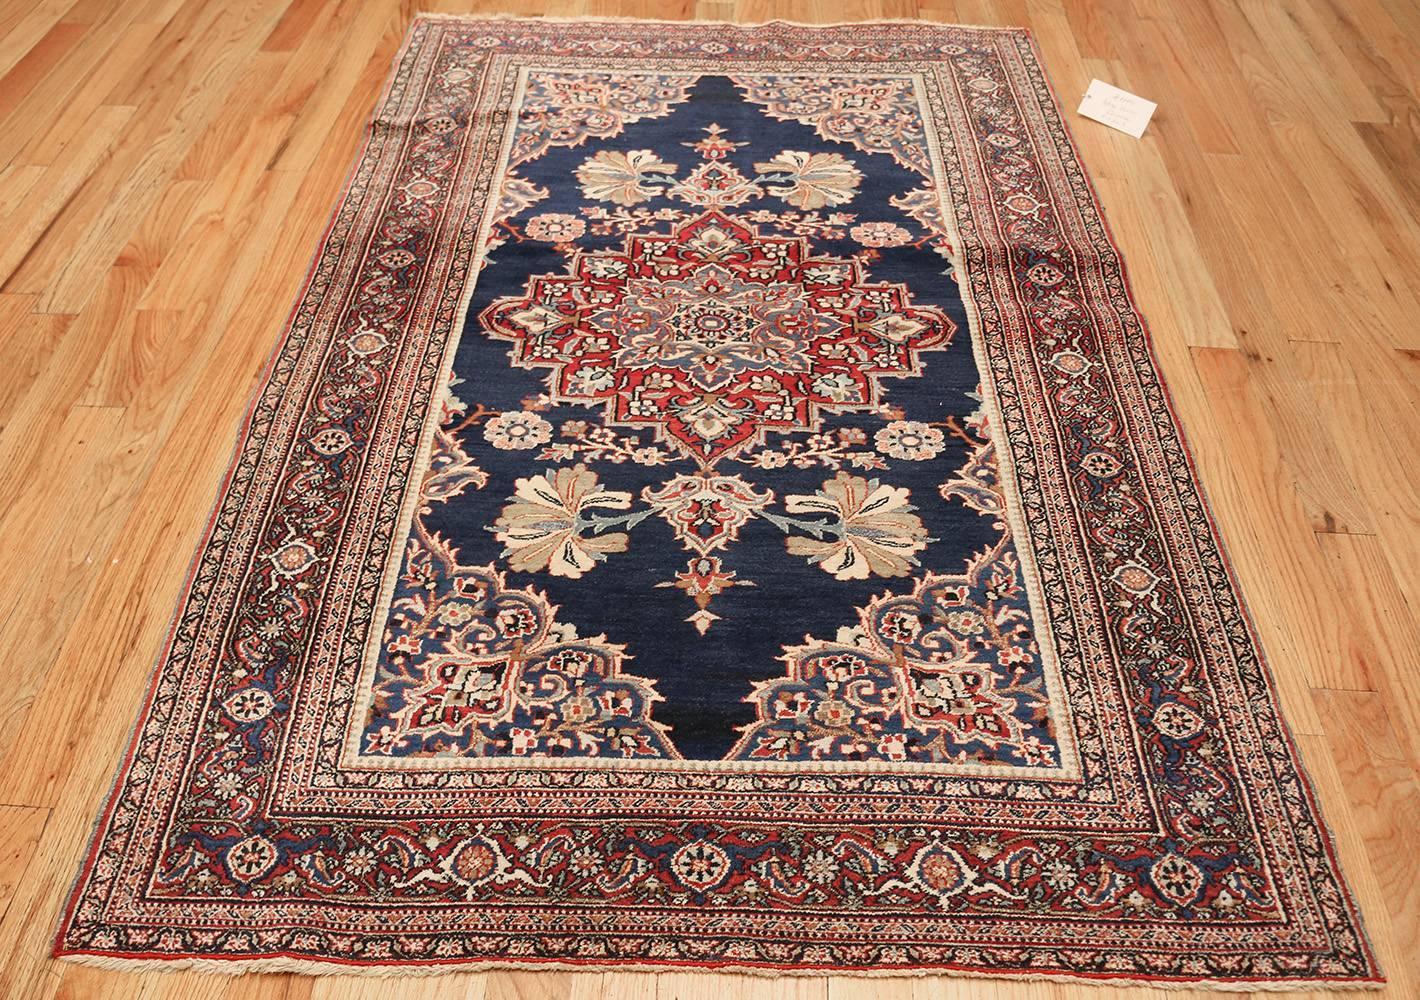 Beautiful Antique Persian Khorassan Rug. Size: 4 ft 5 in x 6 ft 8 in 3